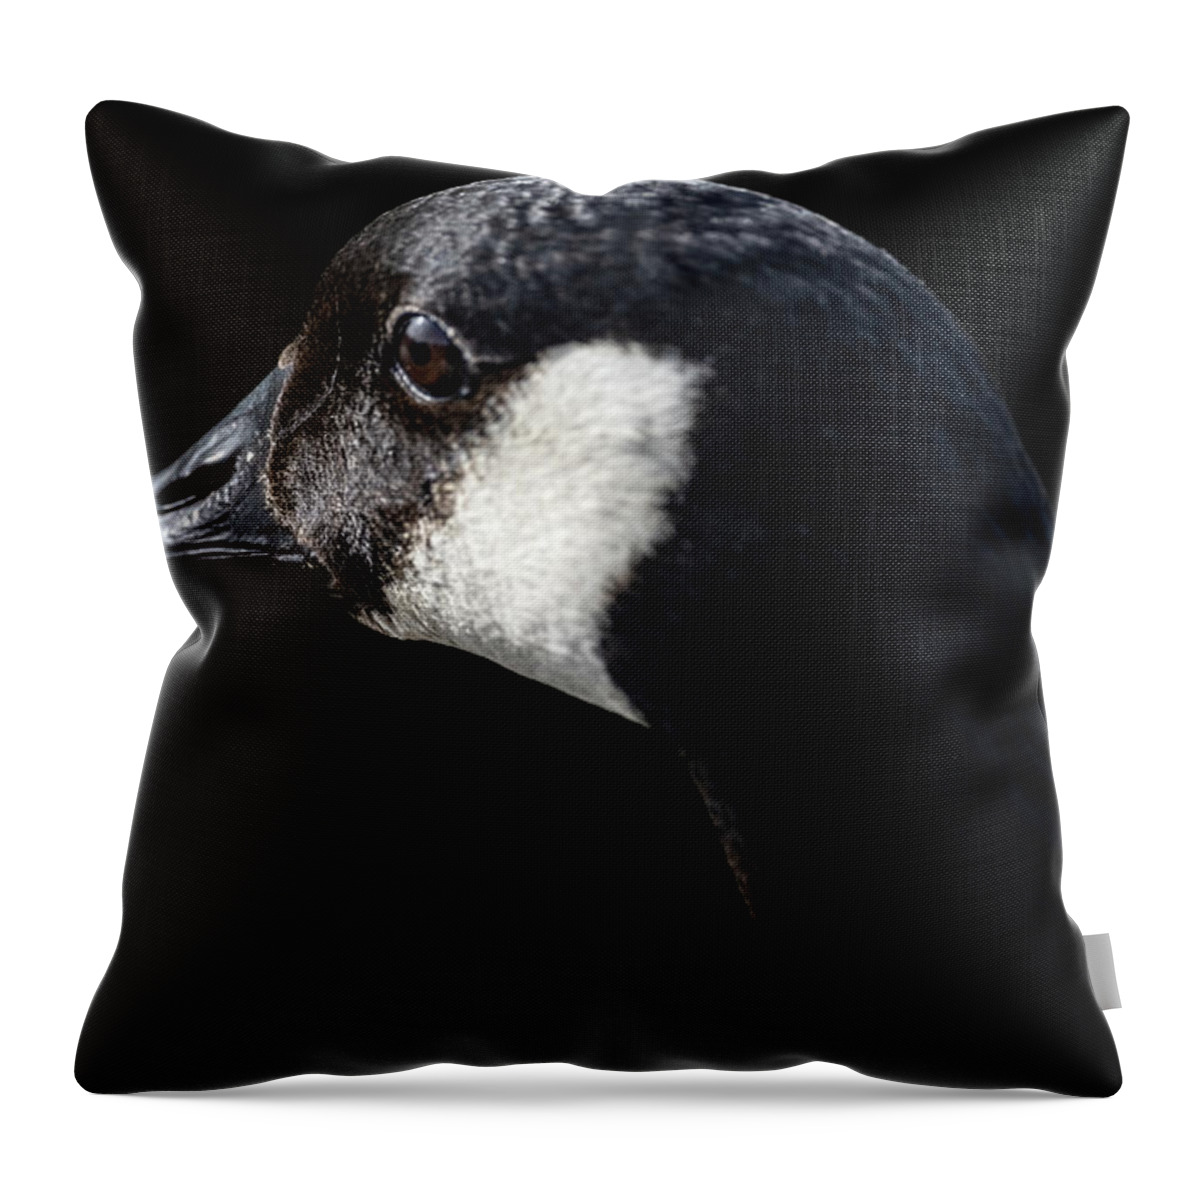 Goose Throw Pillow featuring the photograph The Goose by Jerry Cahill